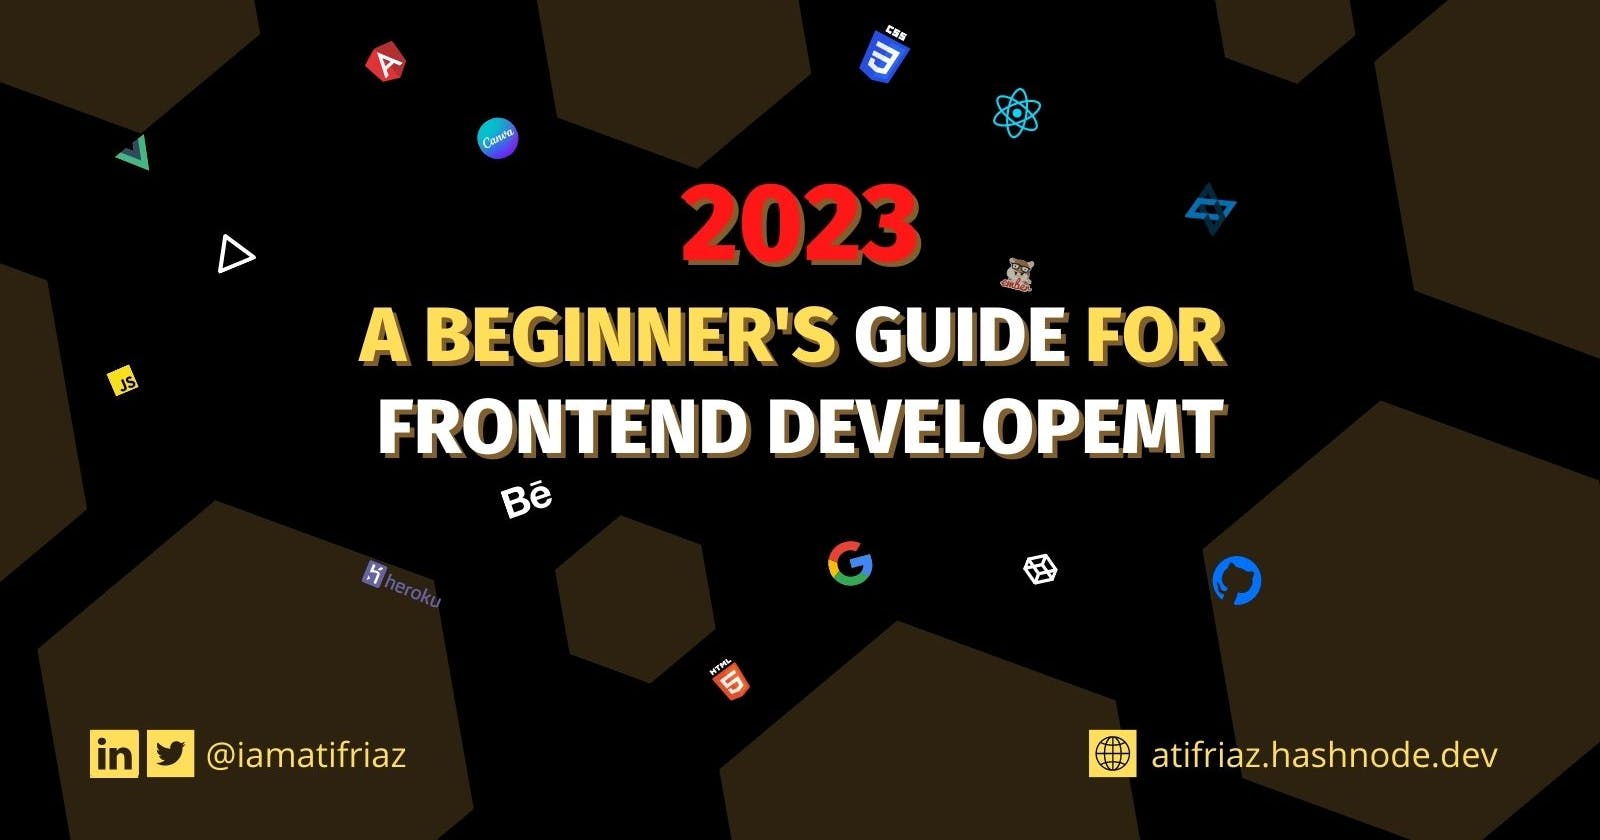 Getting Started with Frontend Development in 2023? A Beginner's Guide